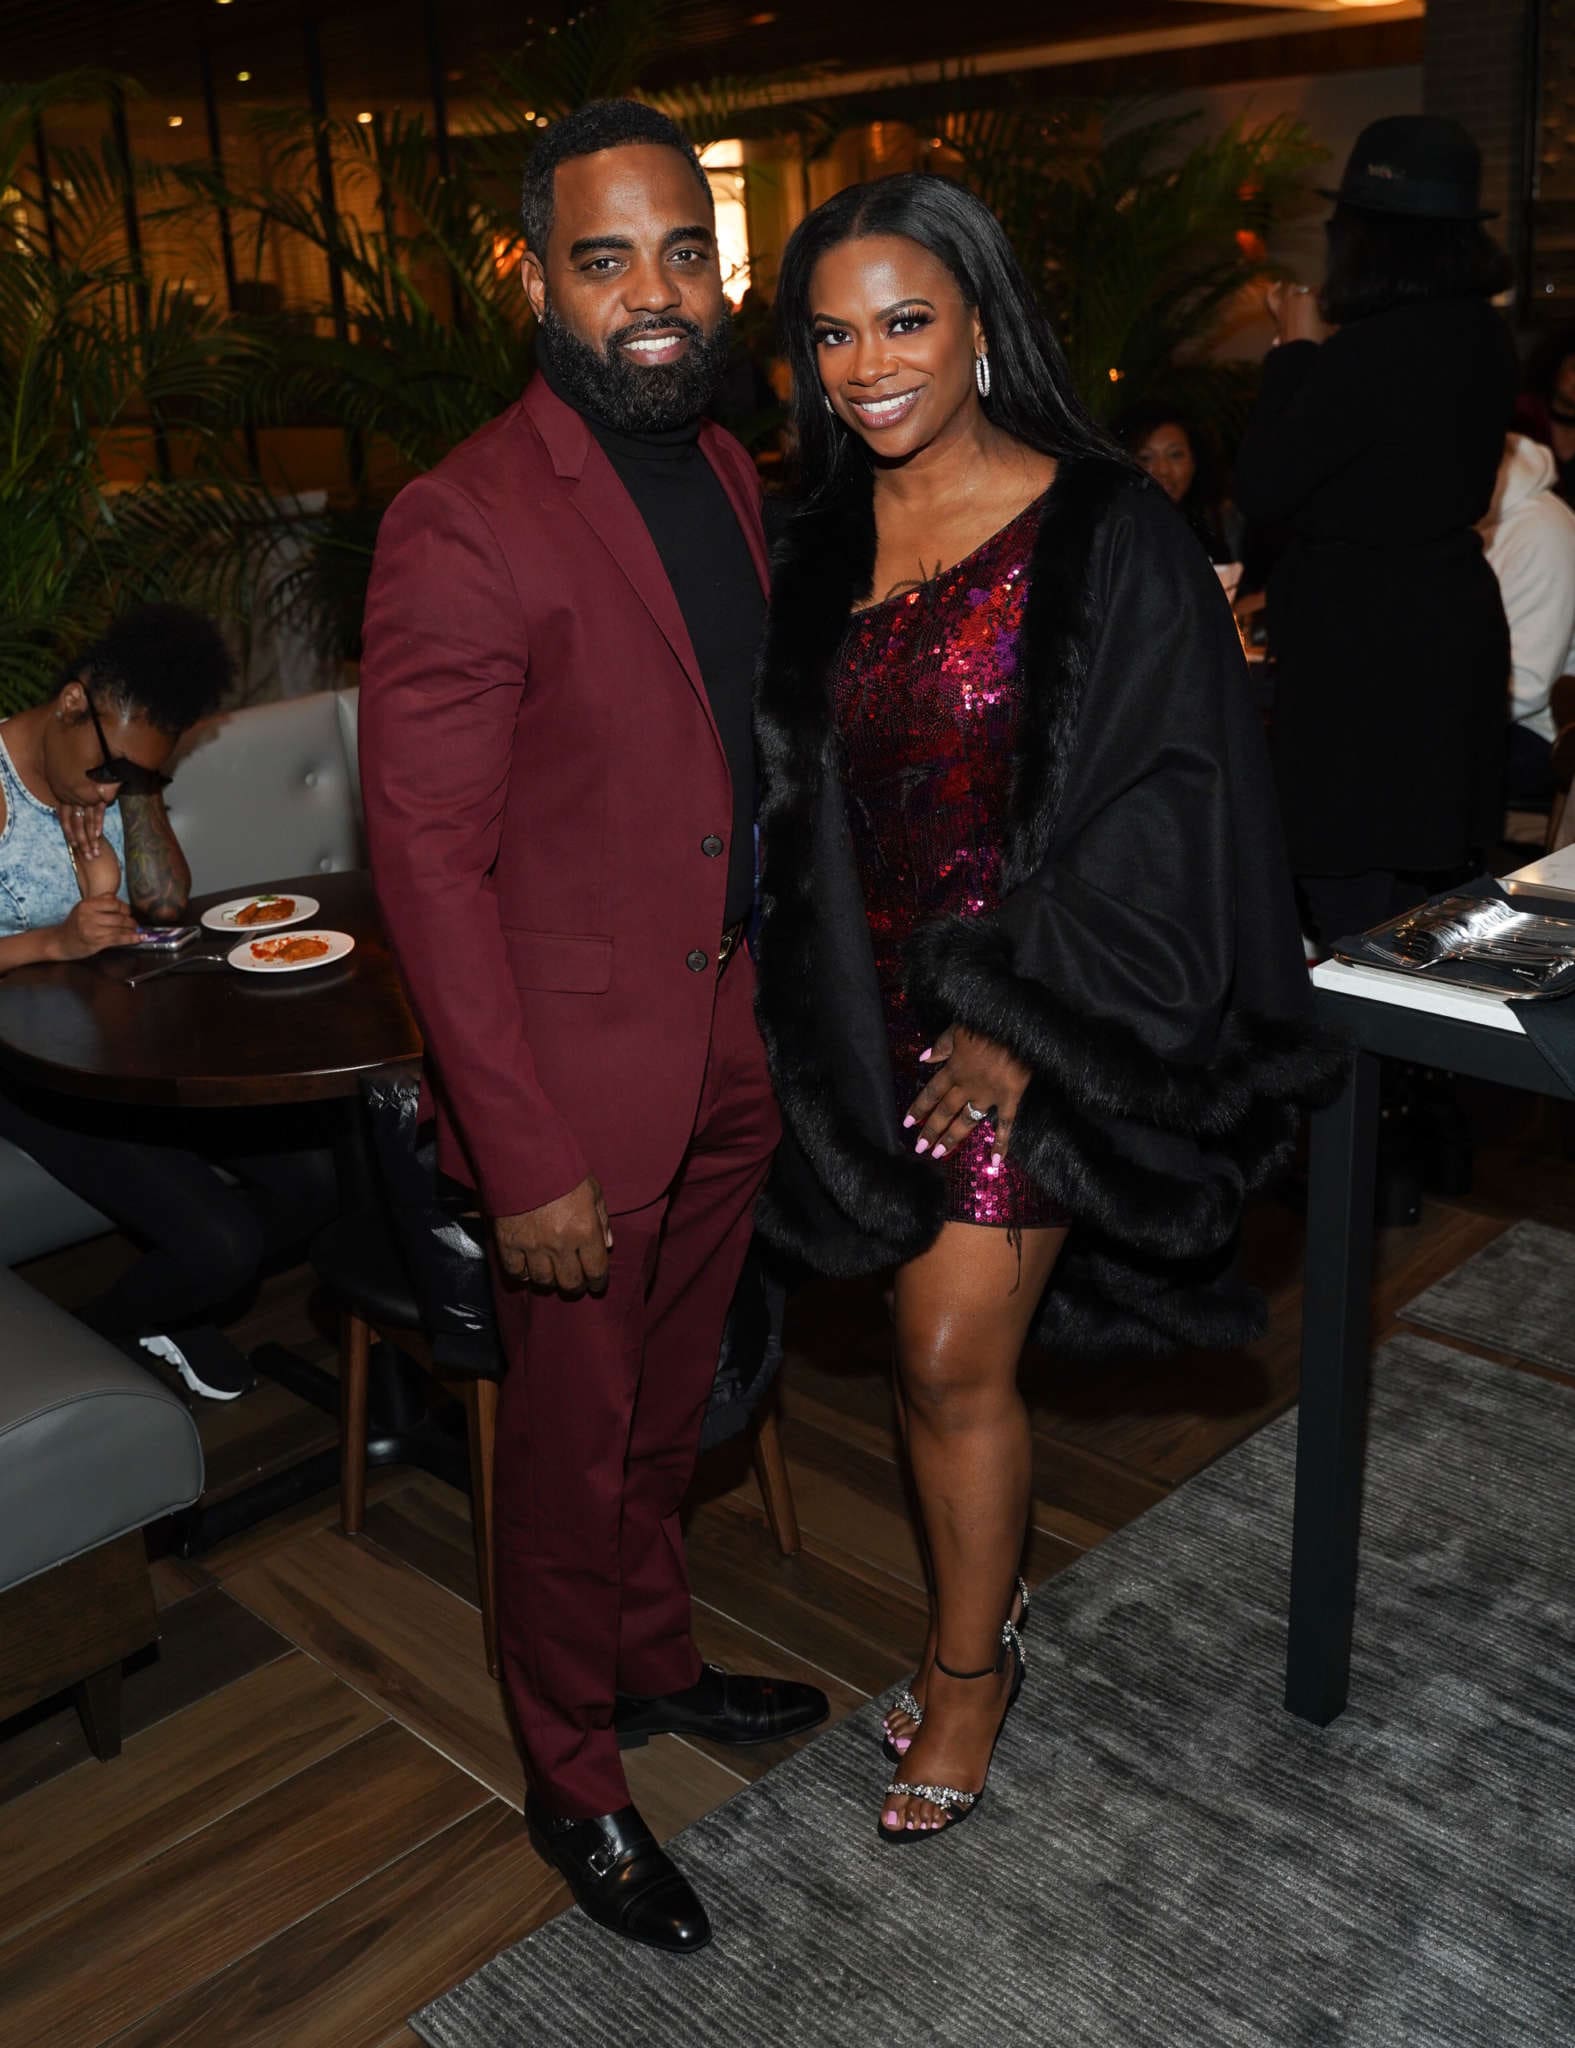 Kandi Burruss' Clip In Which She Morphs Into Her Baby Girl, Blaze Tucker Has Fans In Awe